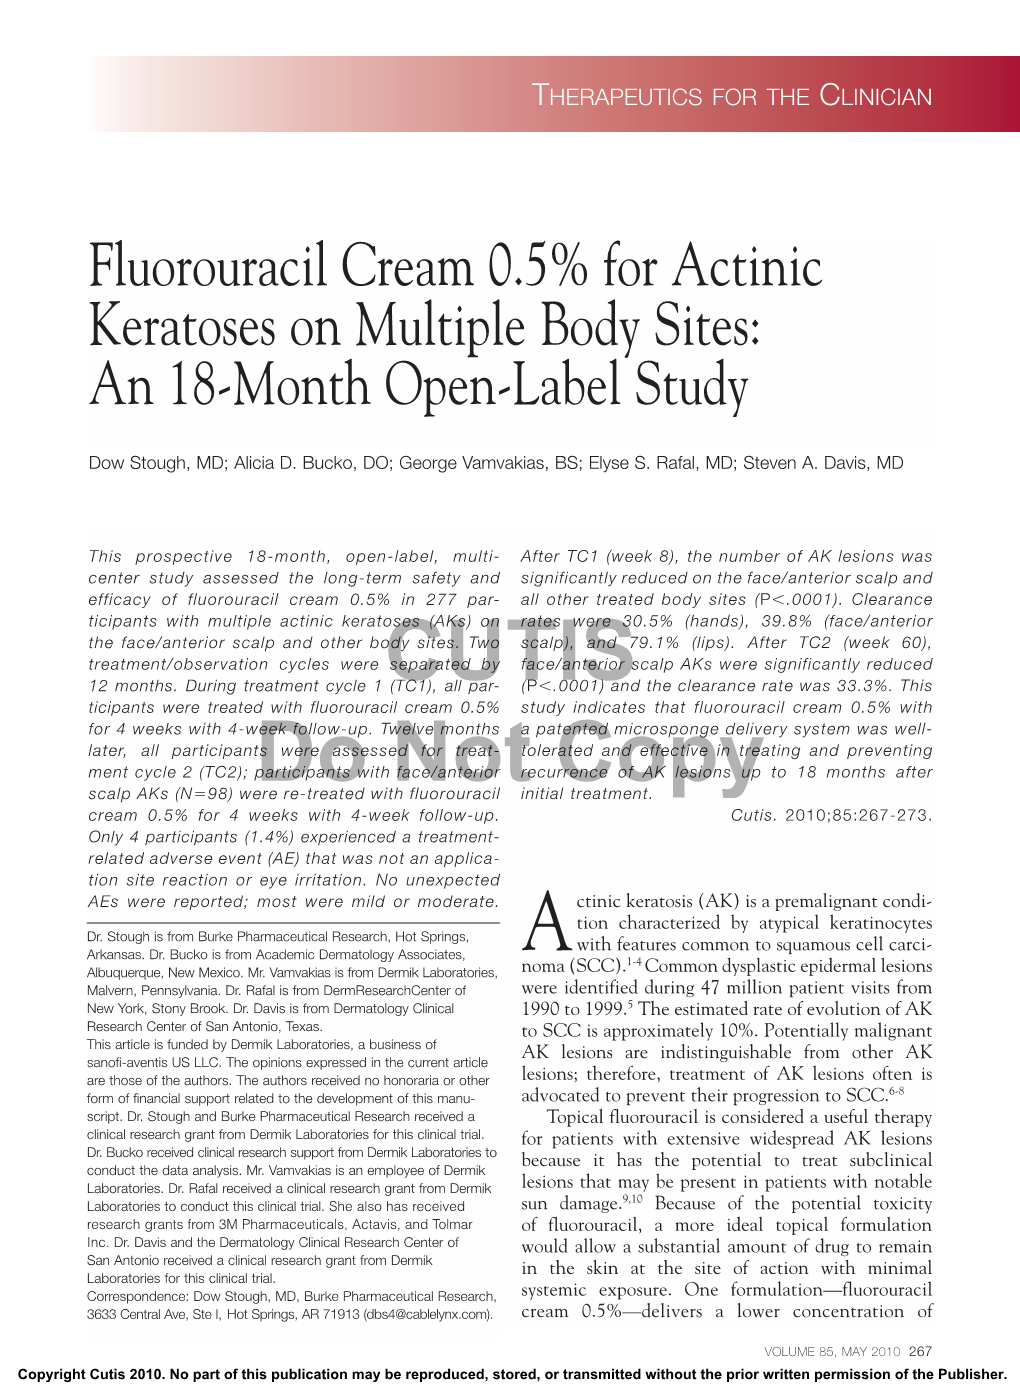 Fluorouracil Cream 0.5% for Actinic Keratoses on Multiple Body Sites: an 18-Month Open-Label Study